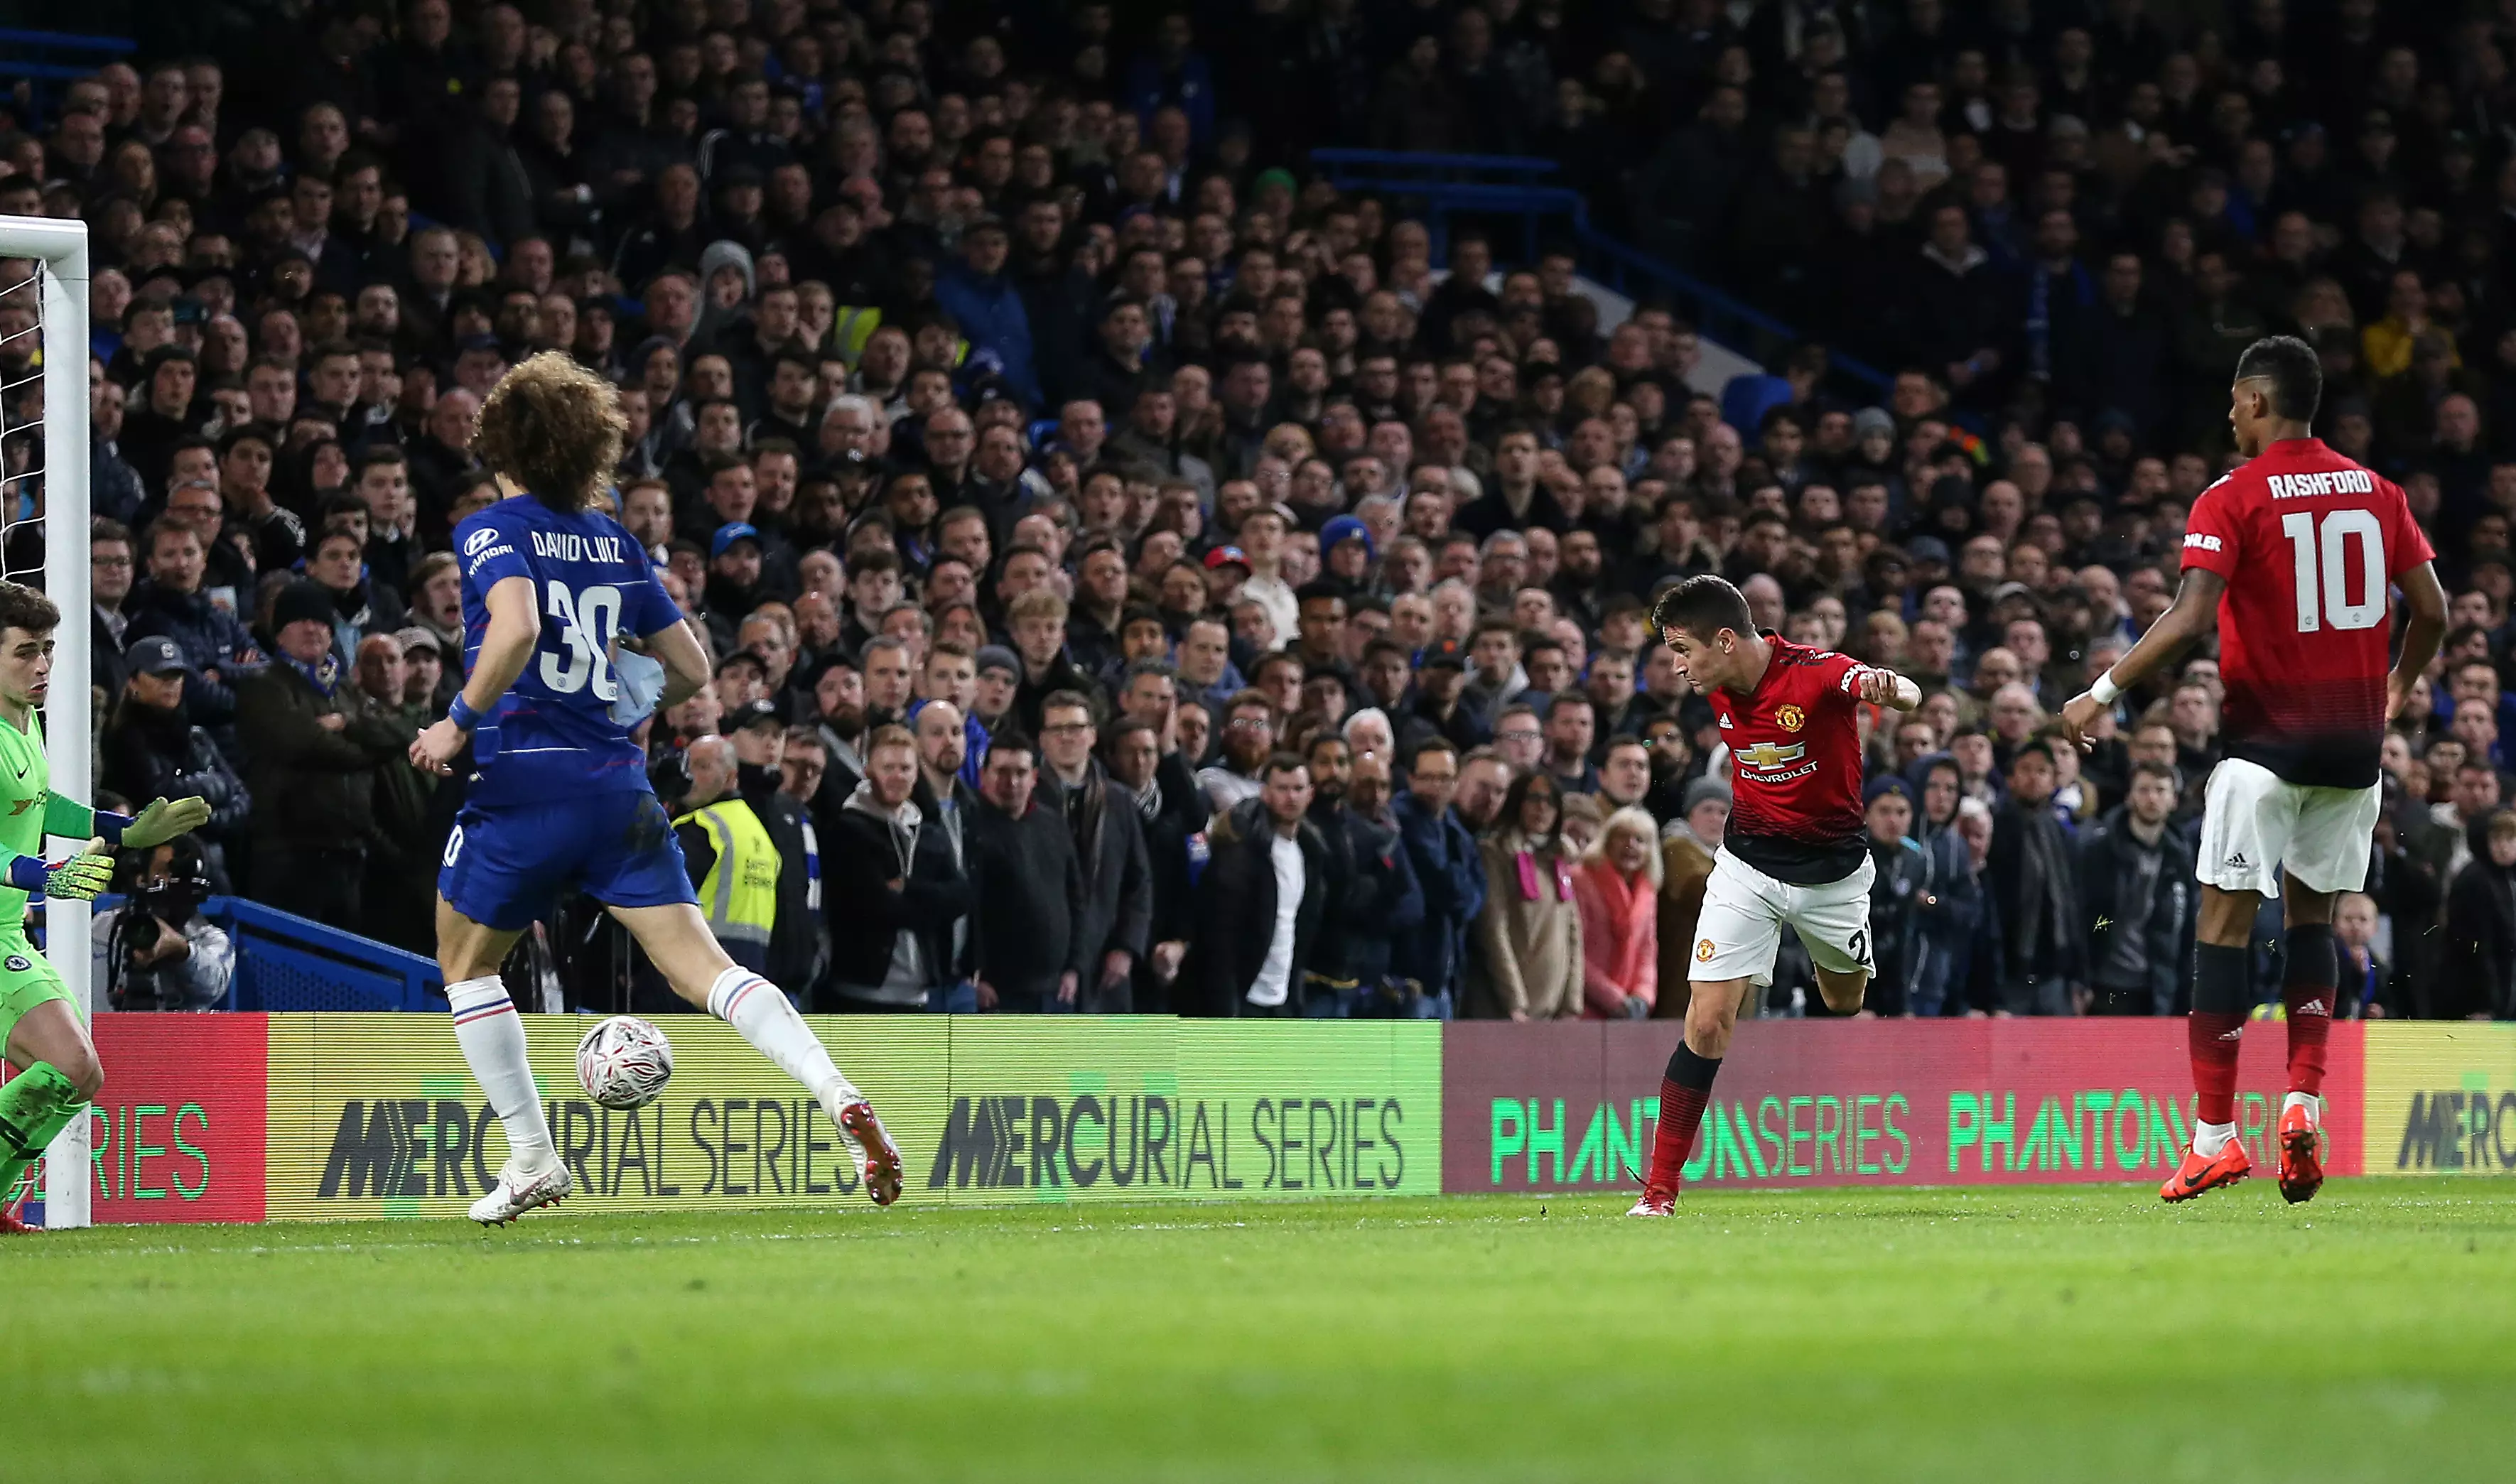 Herrera was fantastic against Chelsea and scored the opening goal. Image: PA Images